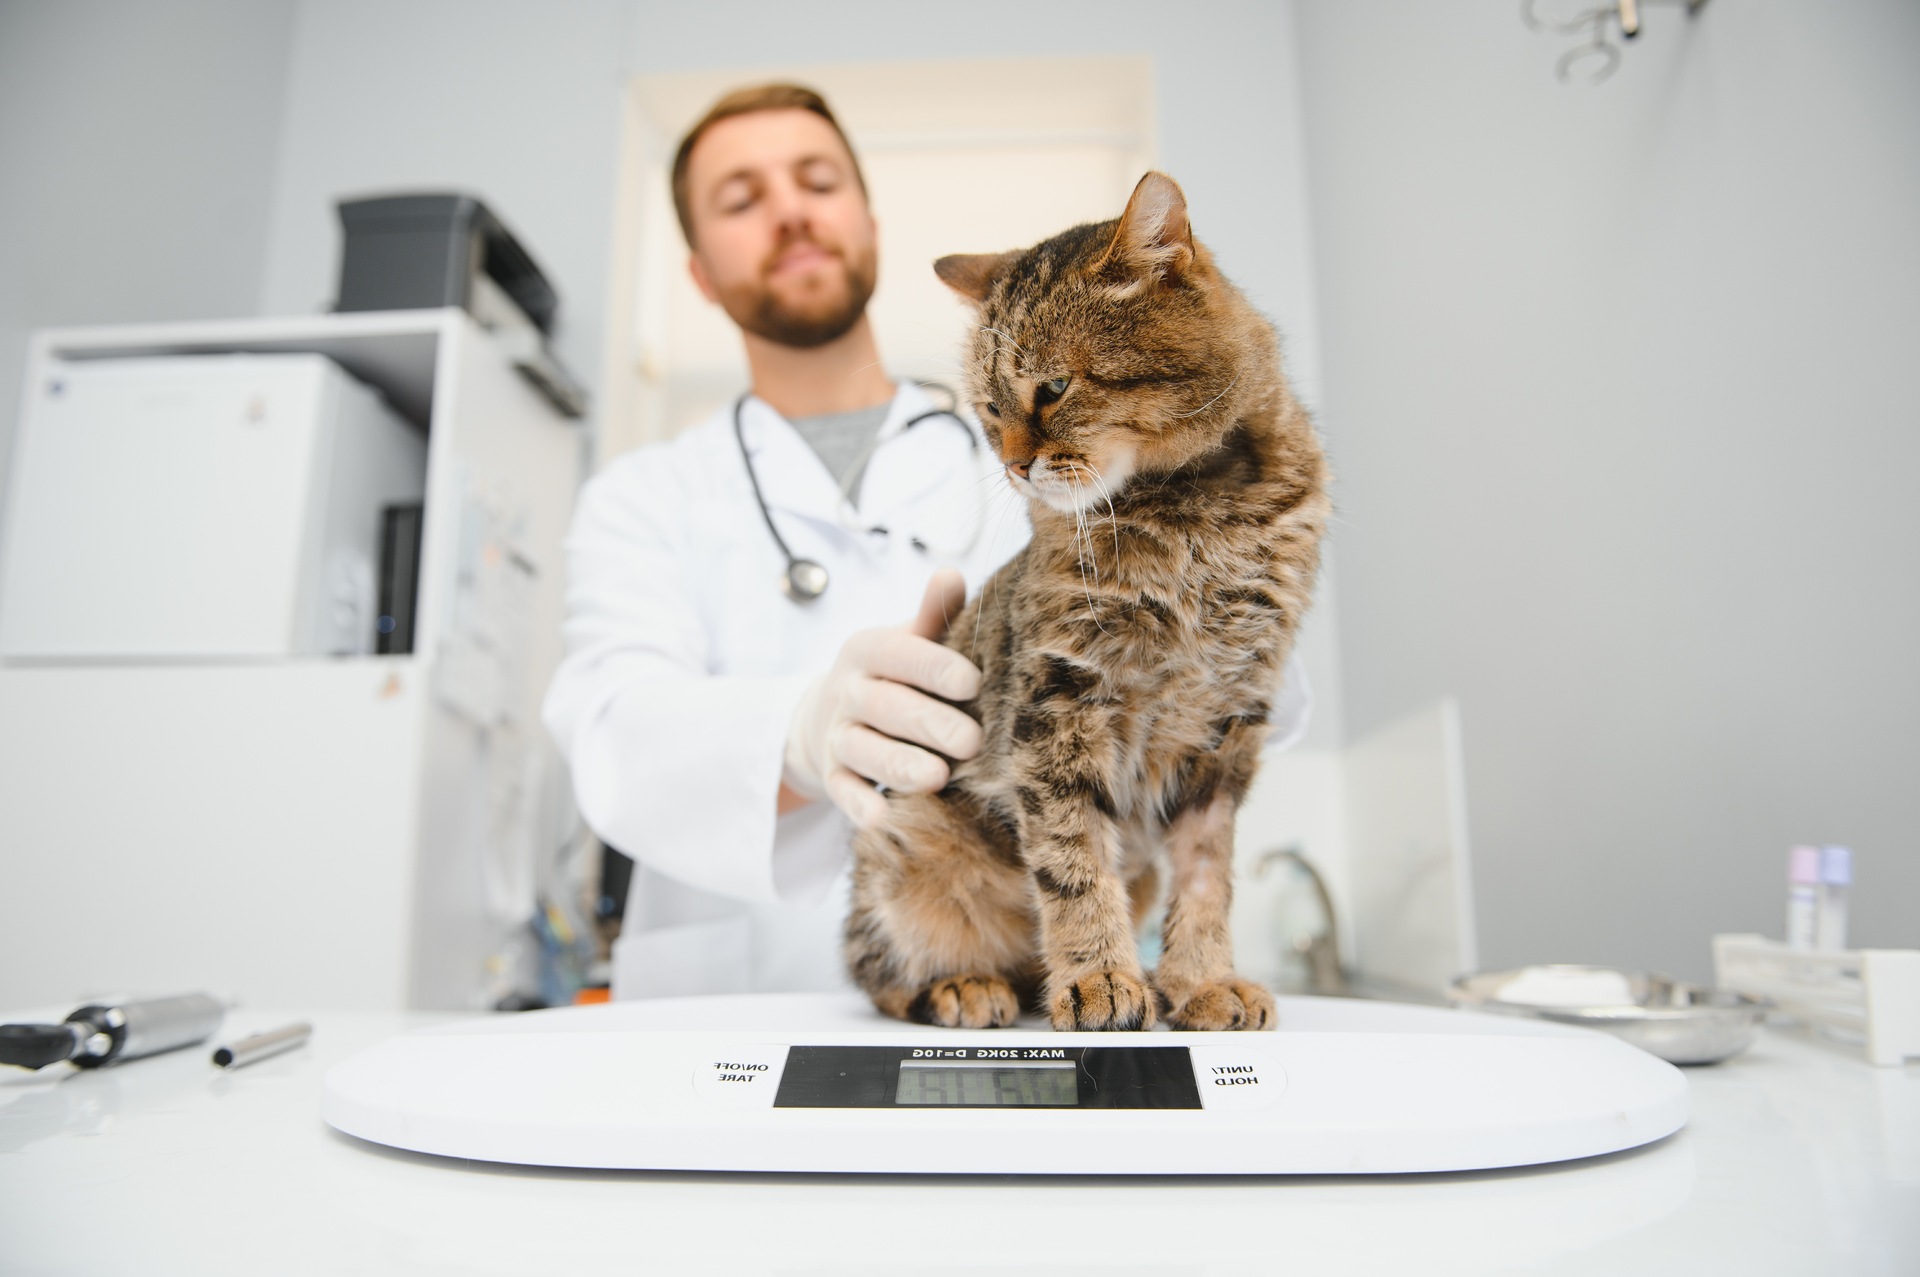 A vet examining a cat on a weighing scale